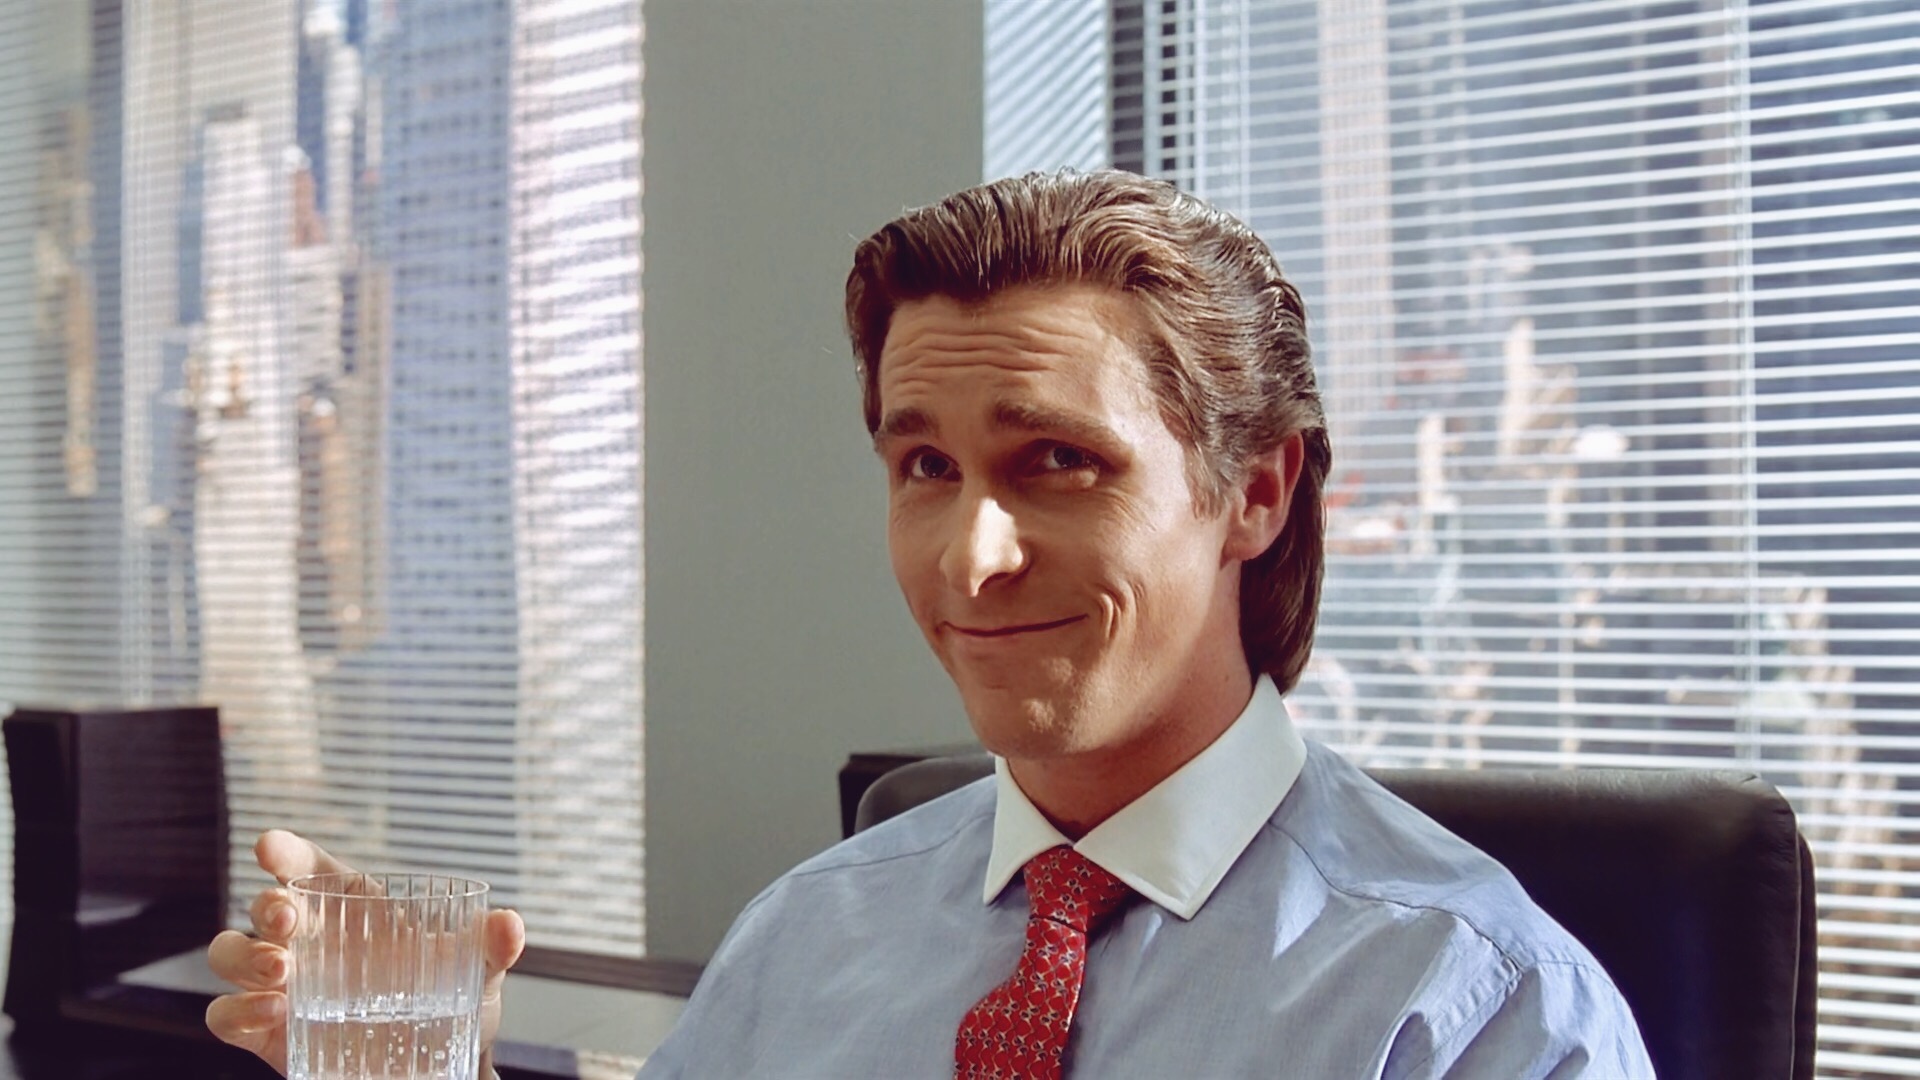 What 1980s Stereotype Are You? Patrick Bateman is scary